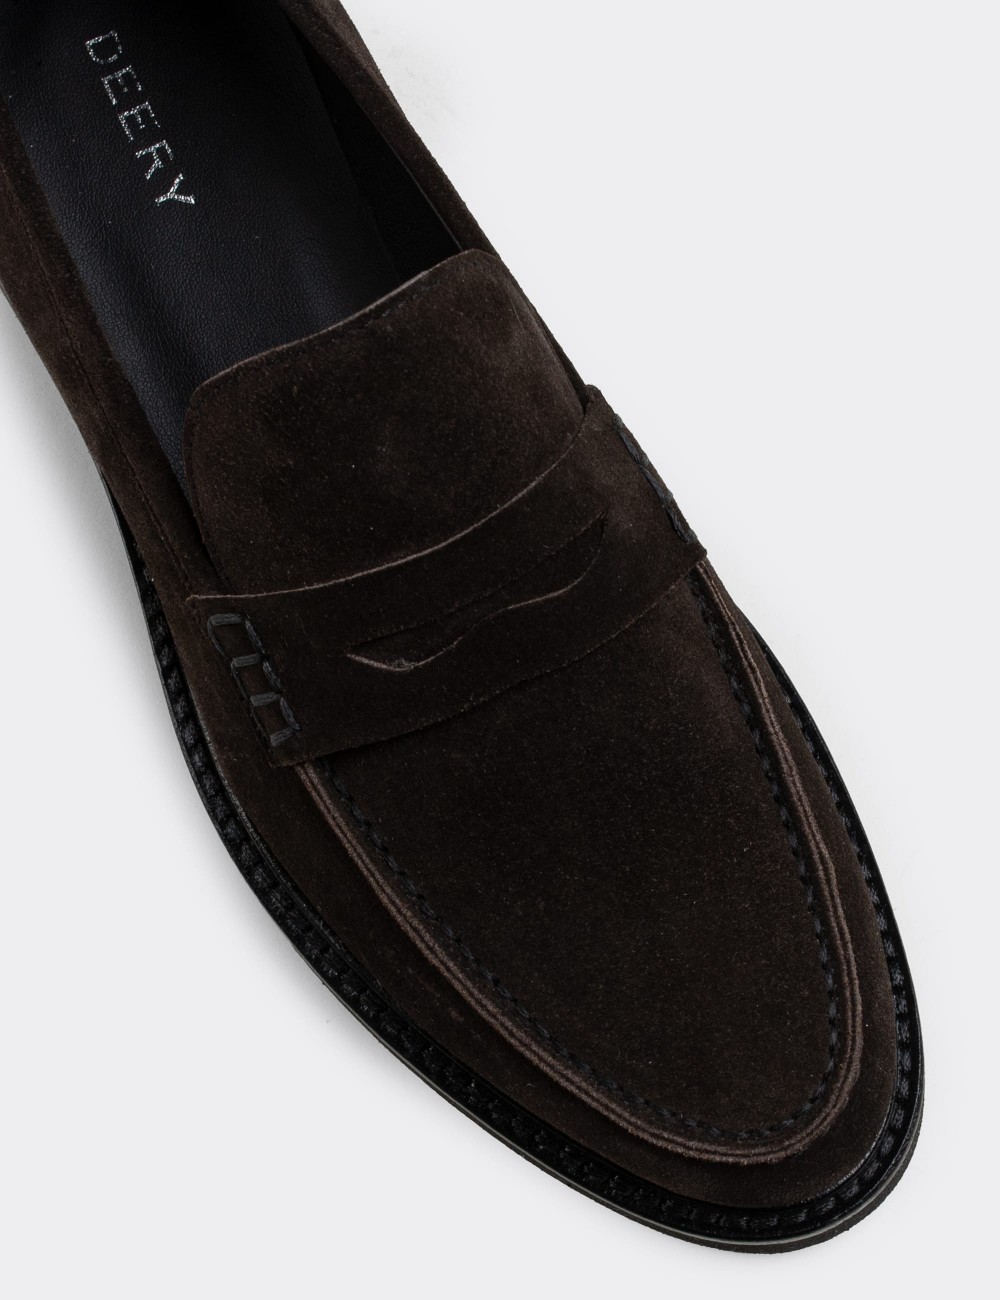 Brown Suede Leather Loafers Shoes - 01574ZKHVE01